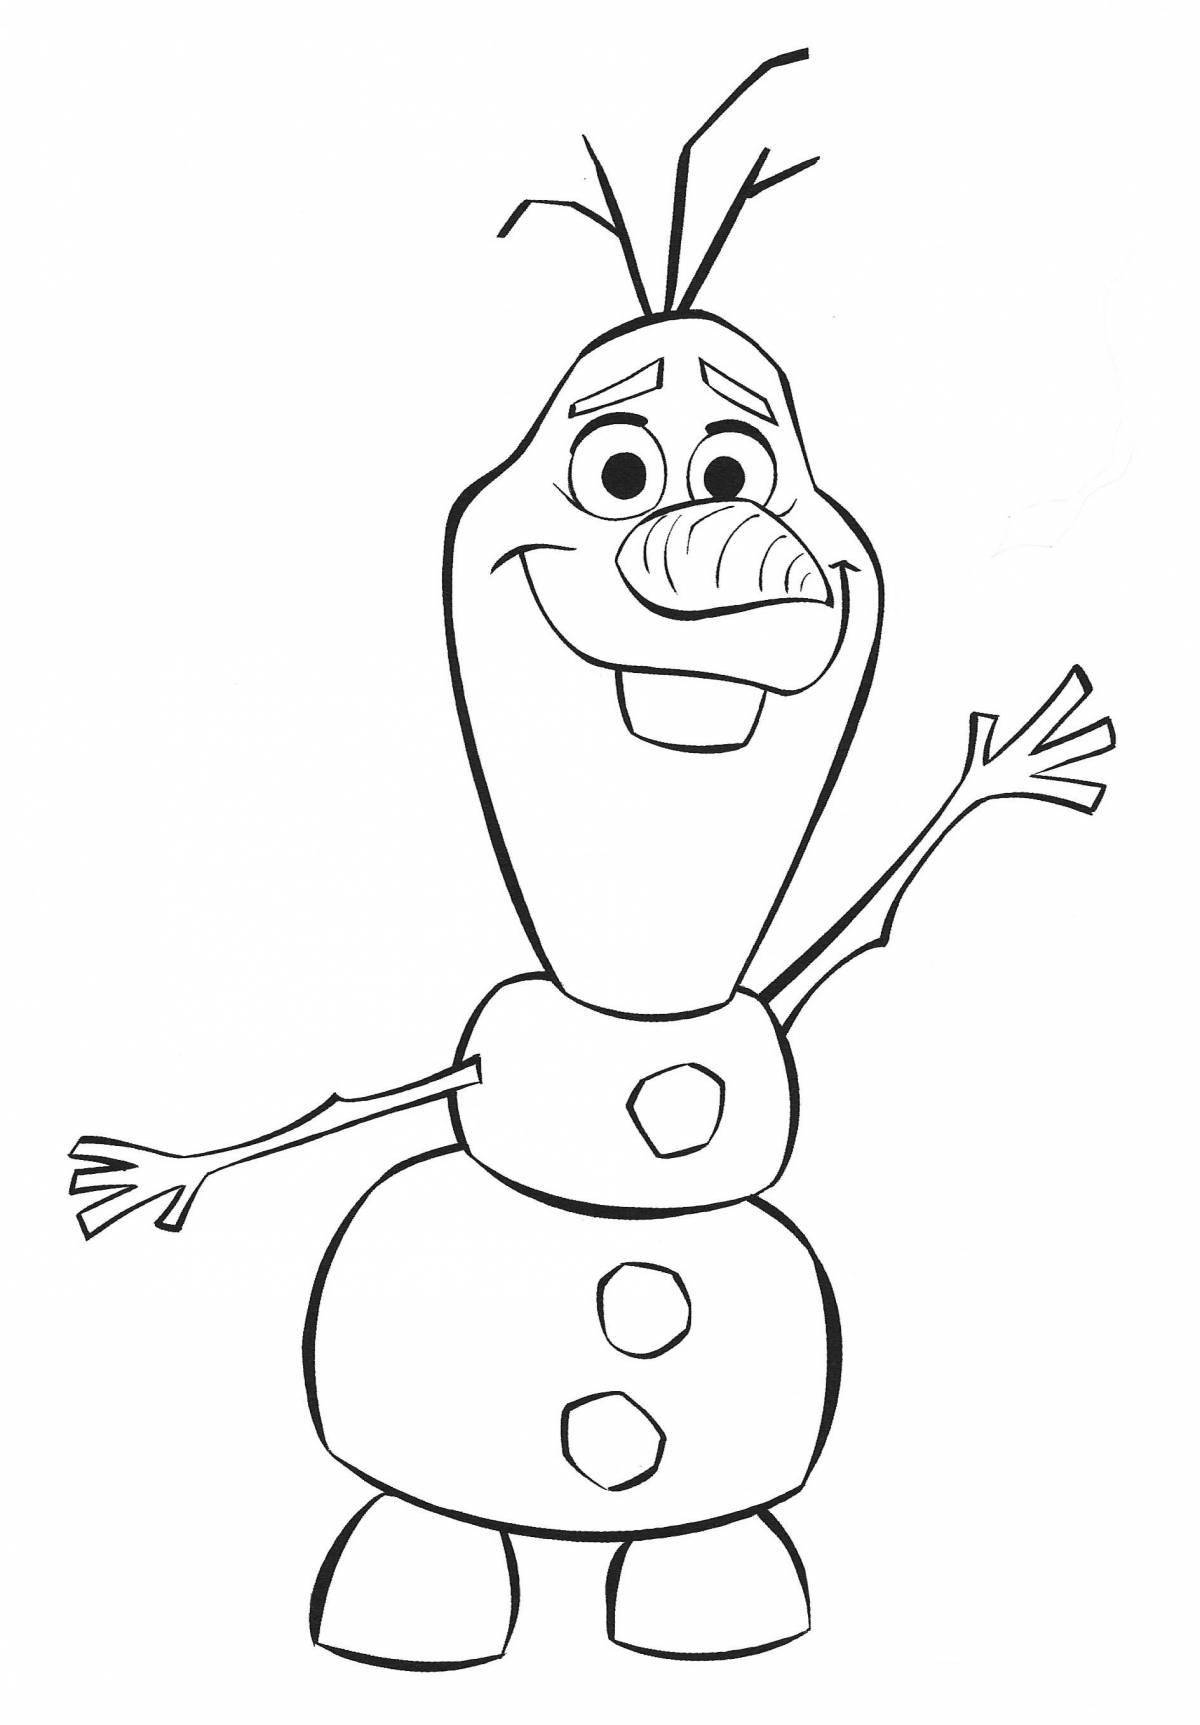 Olaf inspirational coloring book for kids